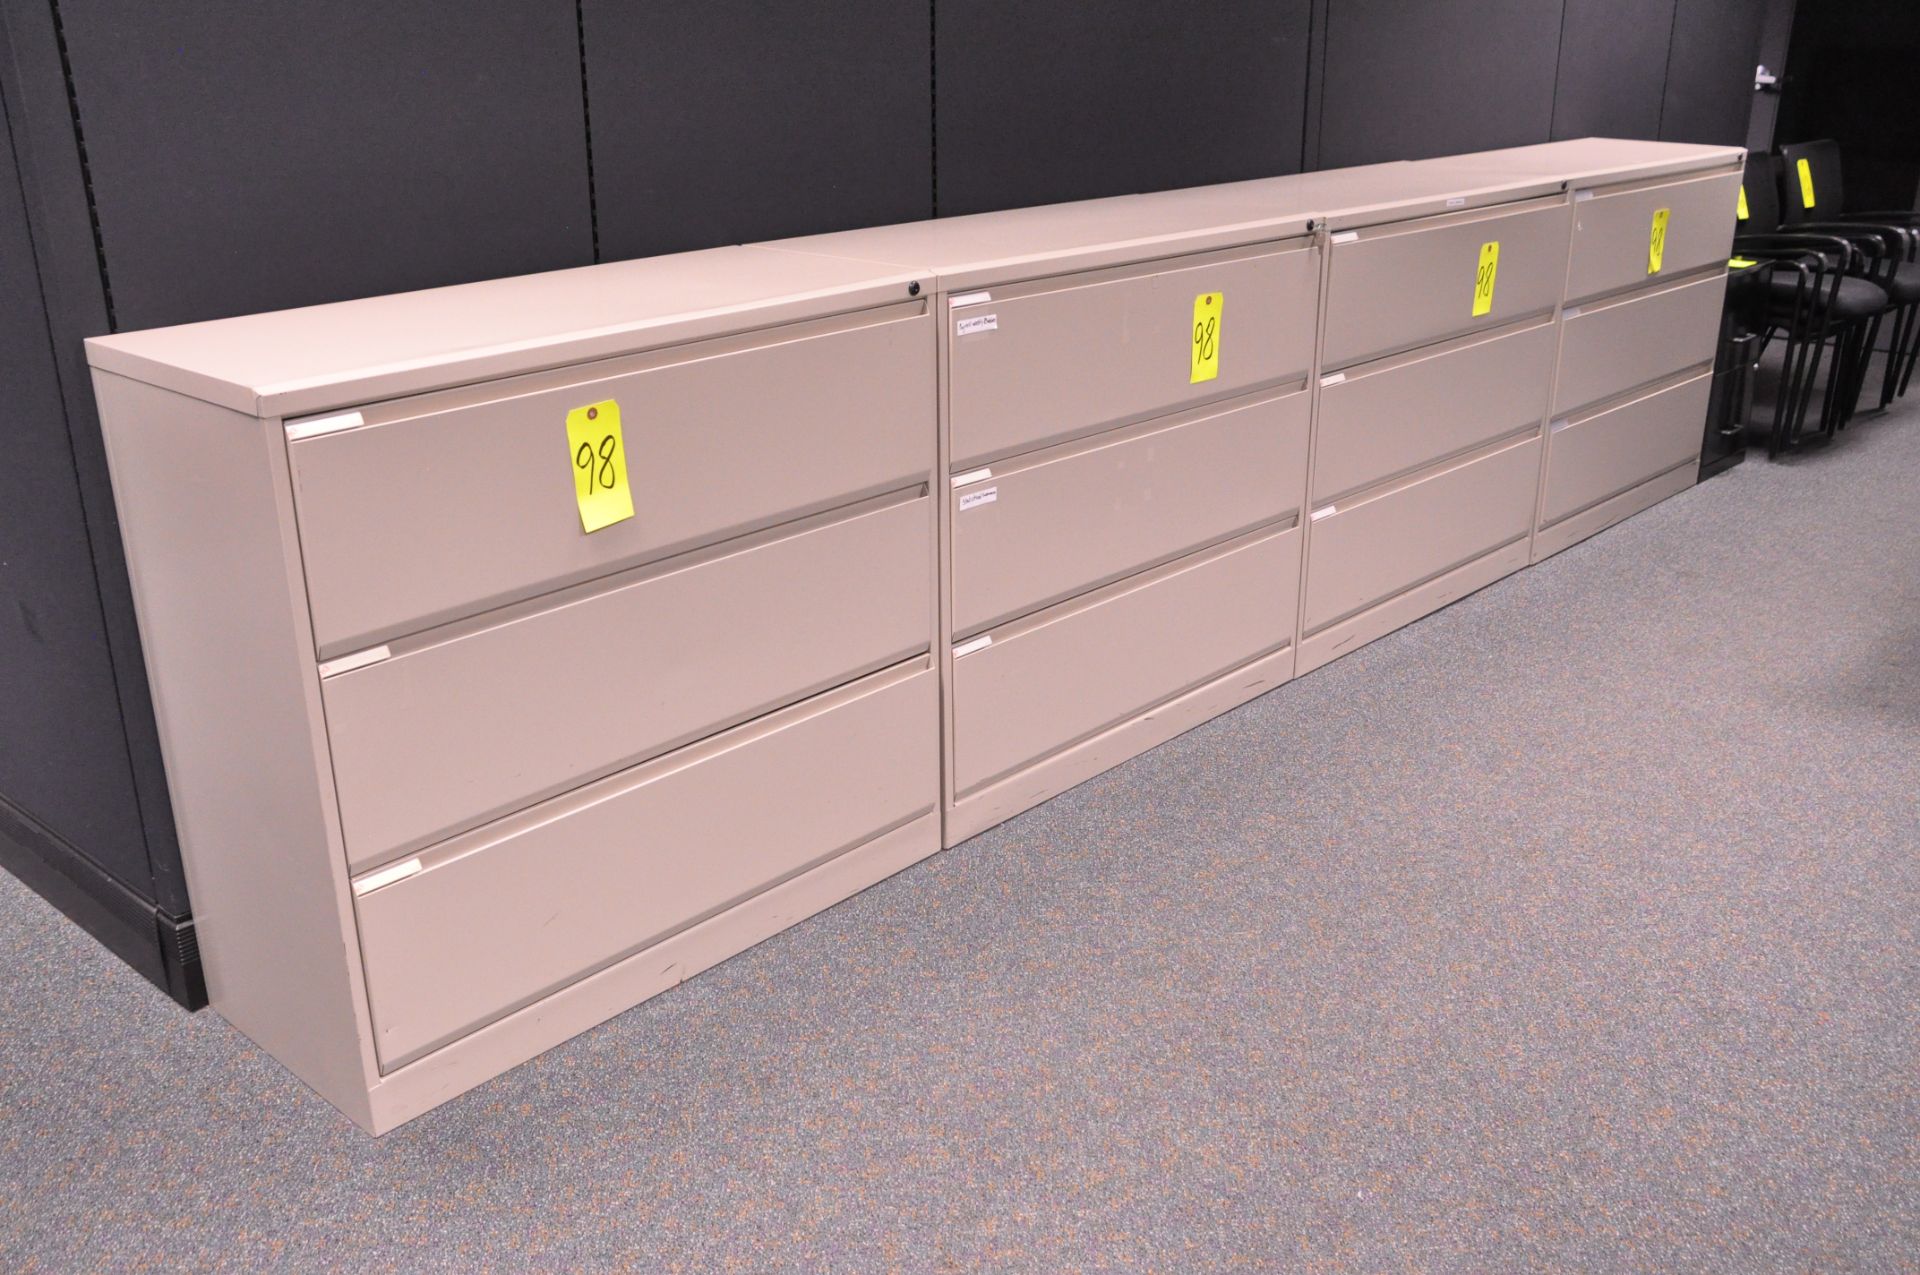 Lot-(4) 3-Drawer Lateral File Cabinets, (Beige), in (1) Group, (Located 1st Floor Offices) - Image 2 of 2